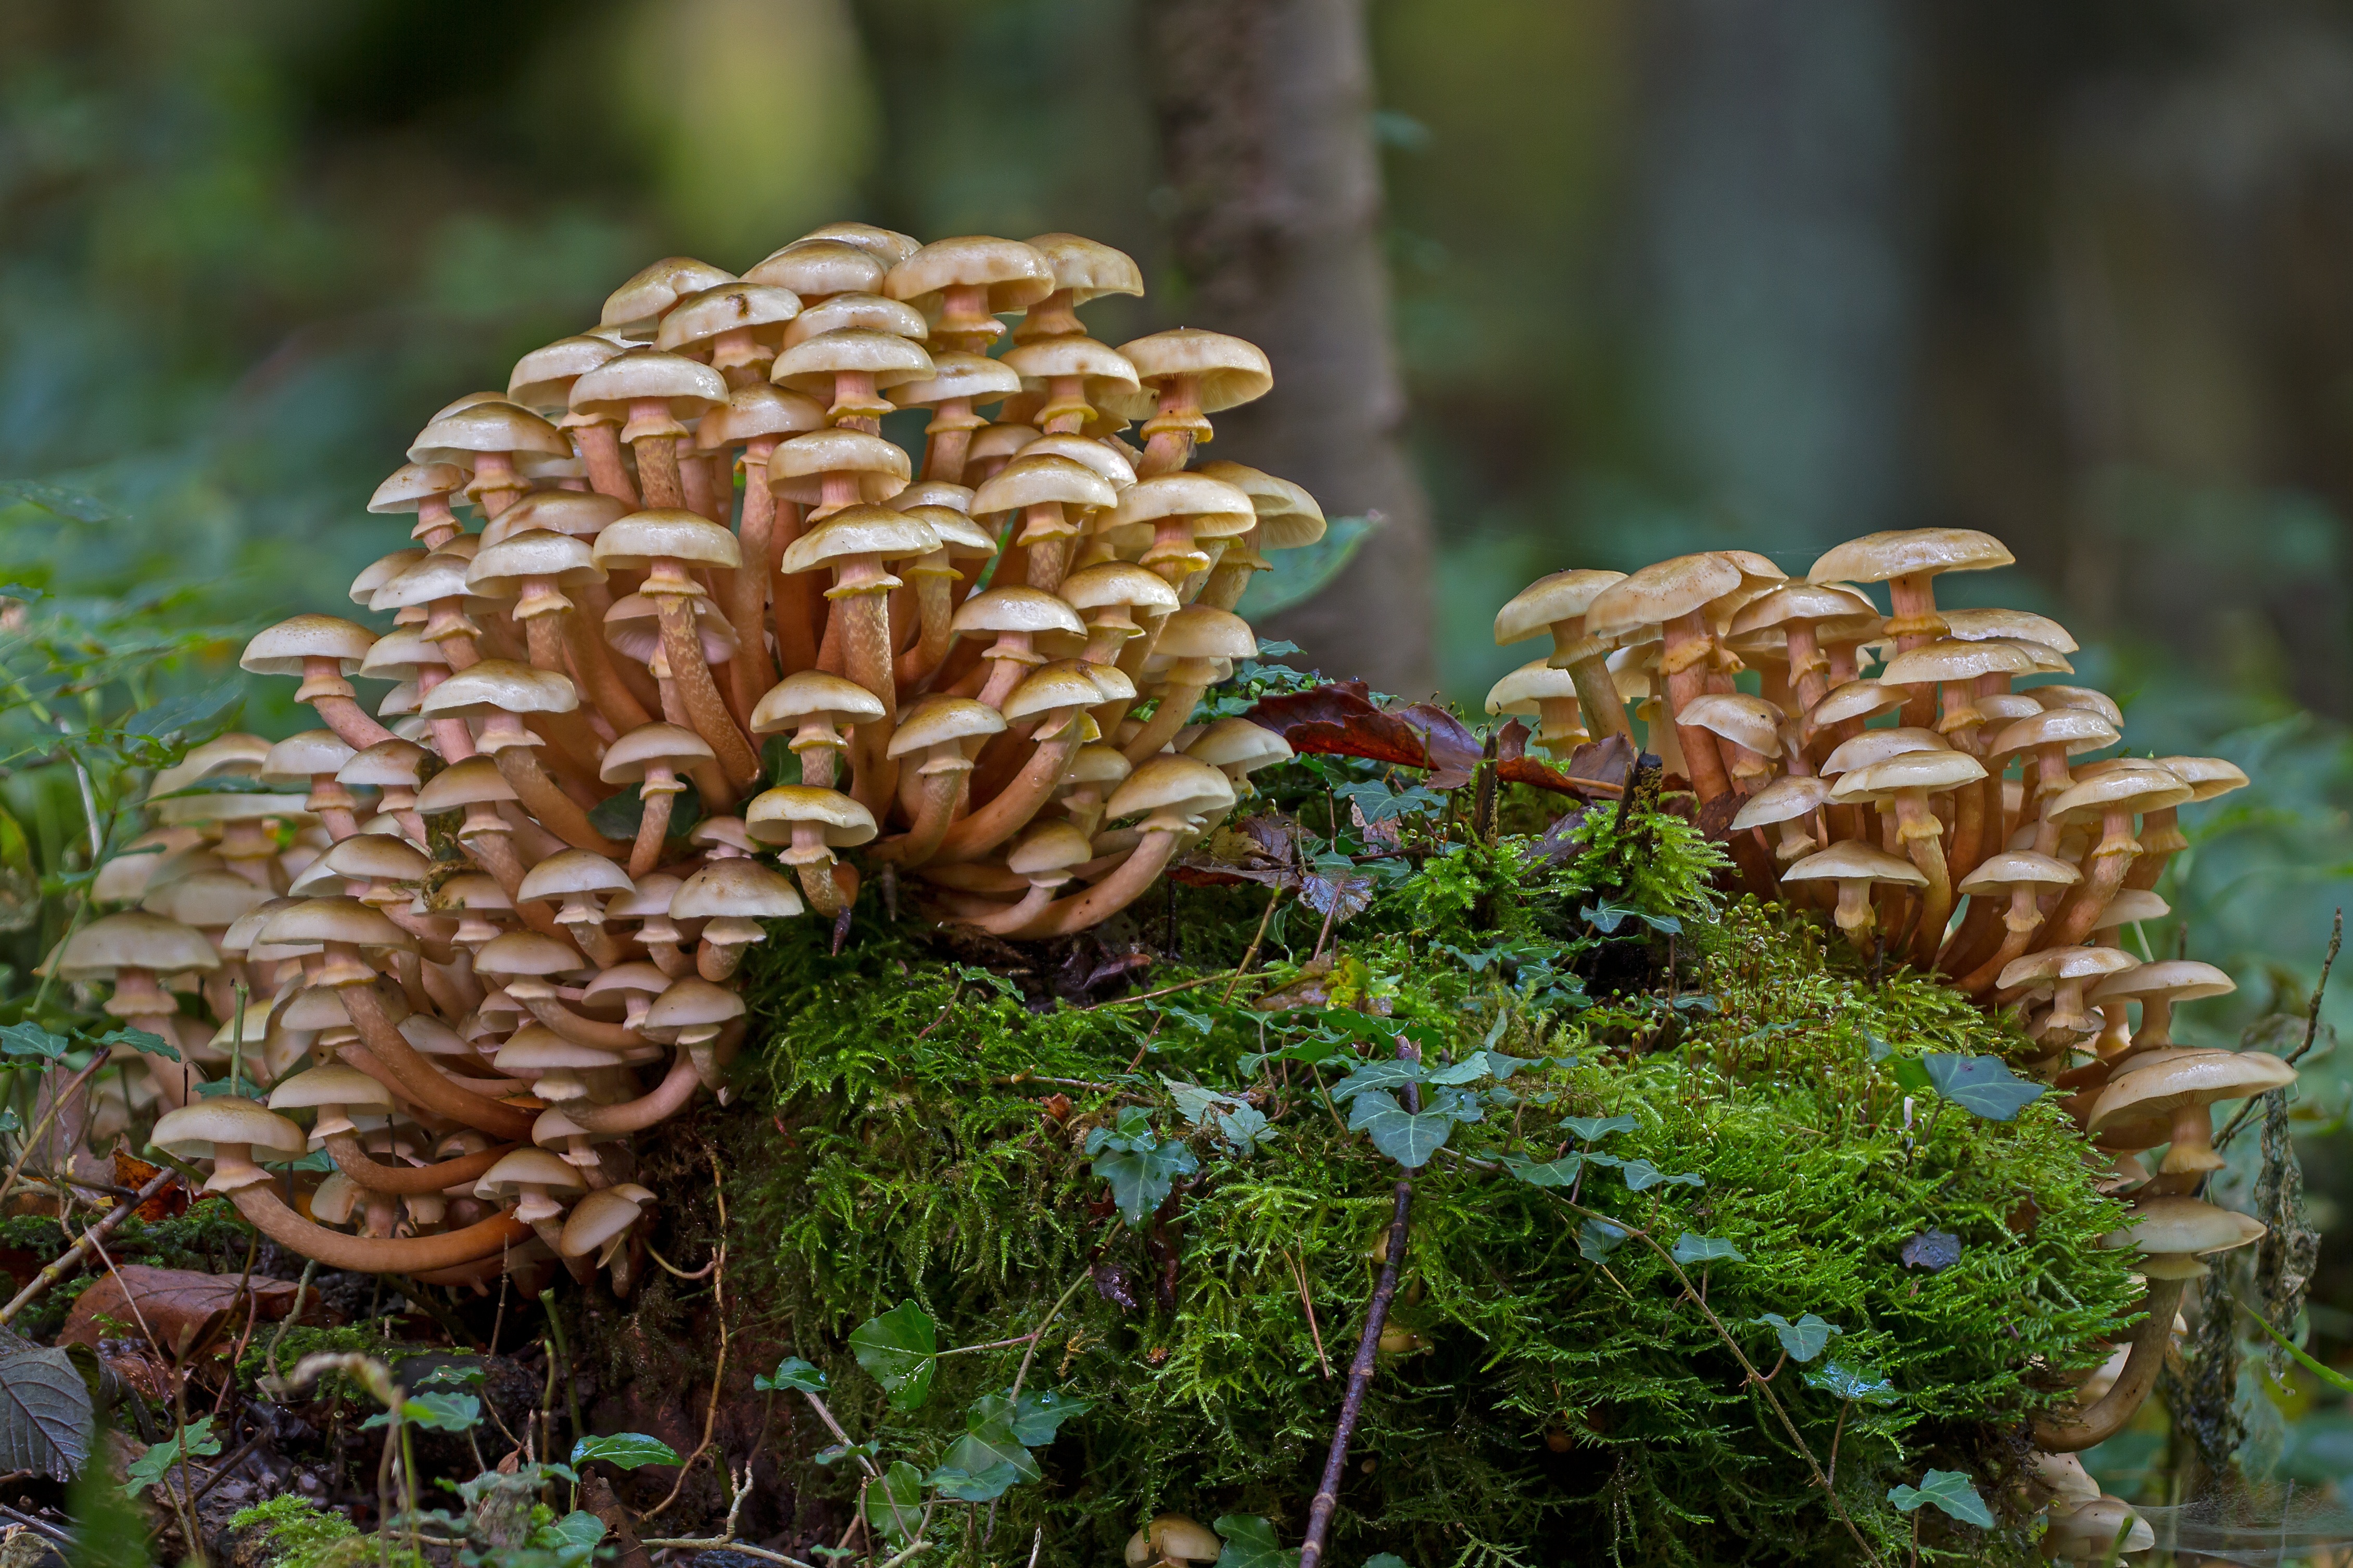 Small Clumps of Mushrooms by adege